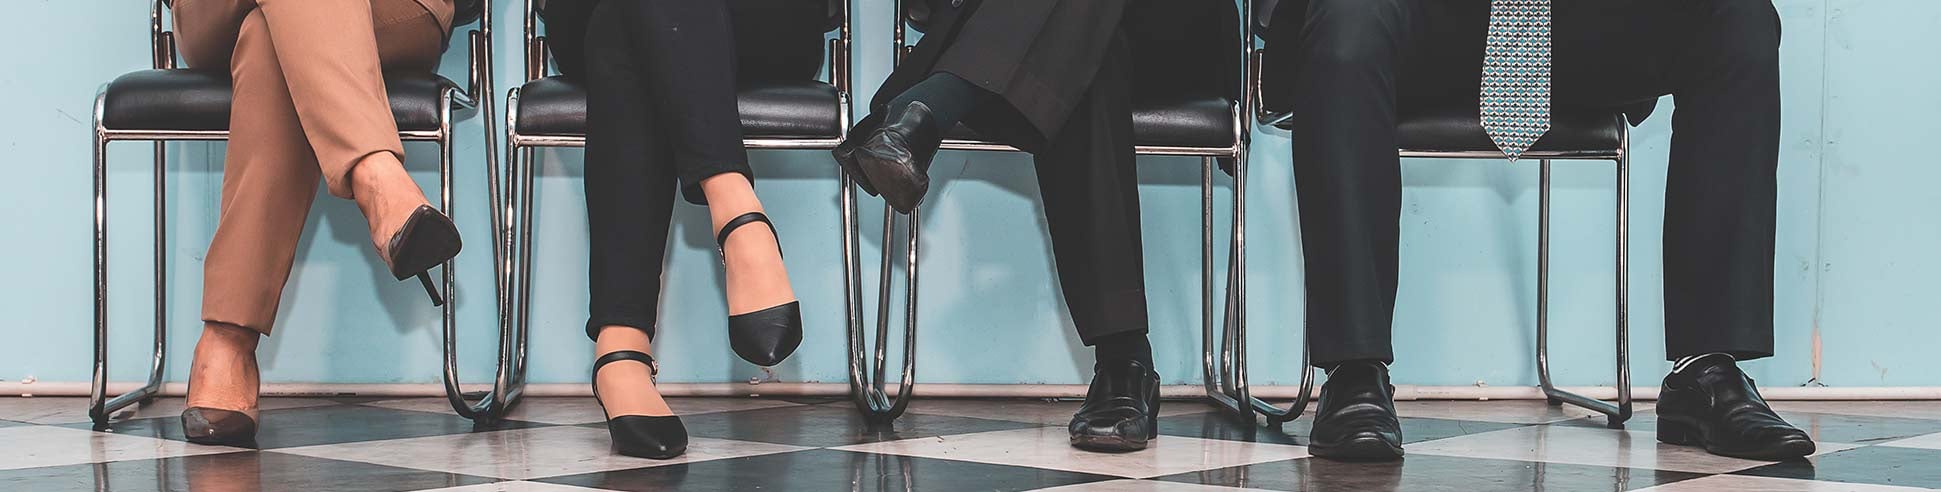 Legs of four people in business attire sitting on a row of chairs